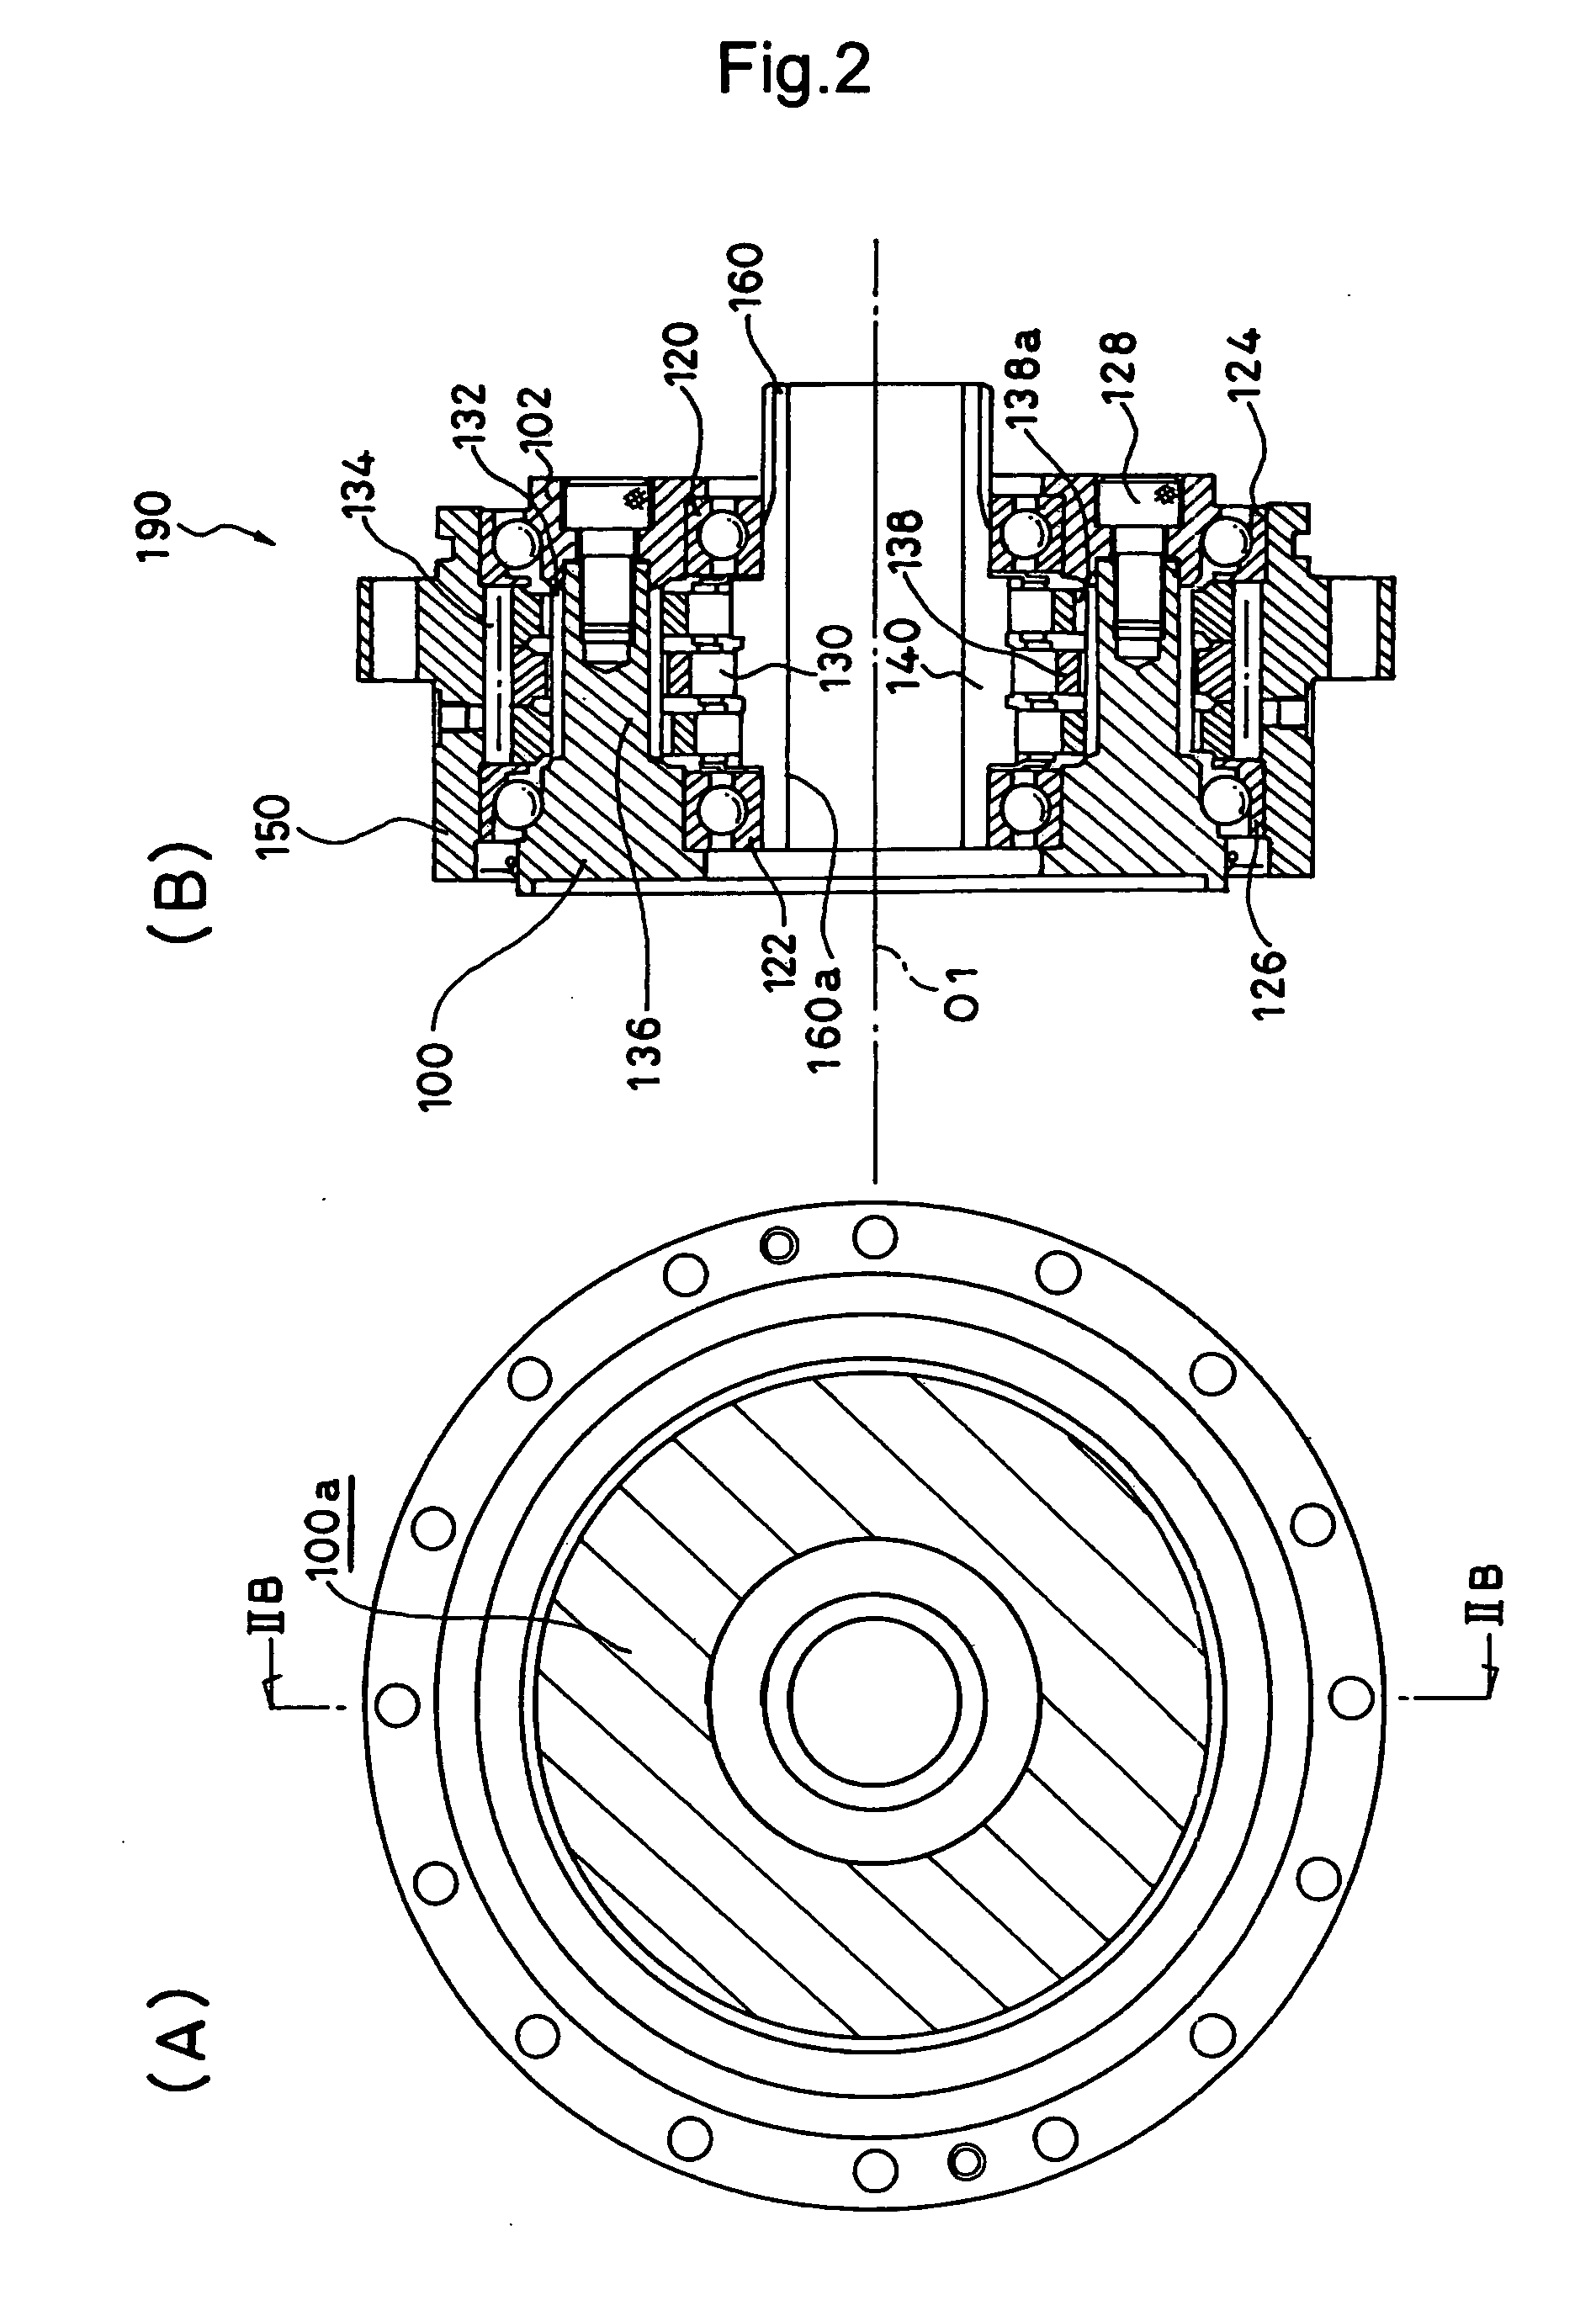 Power transmission device for driving robot wrist and power transmission device